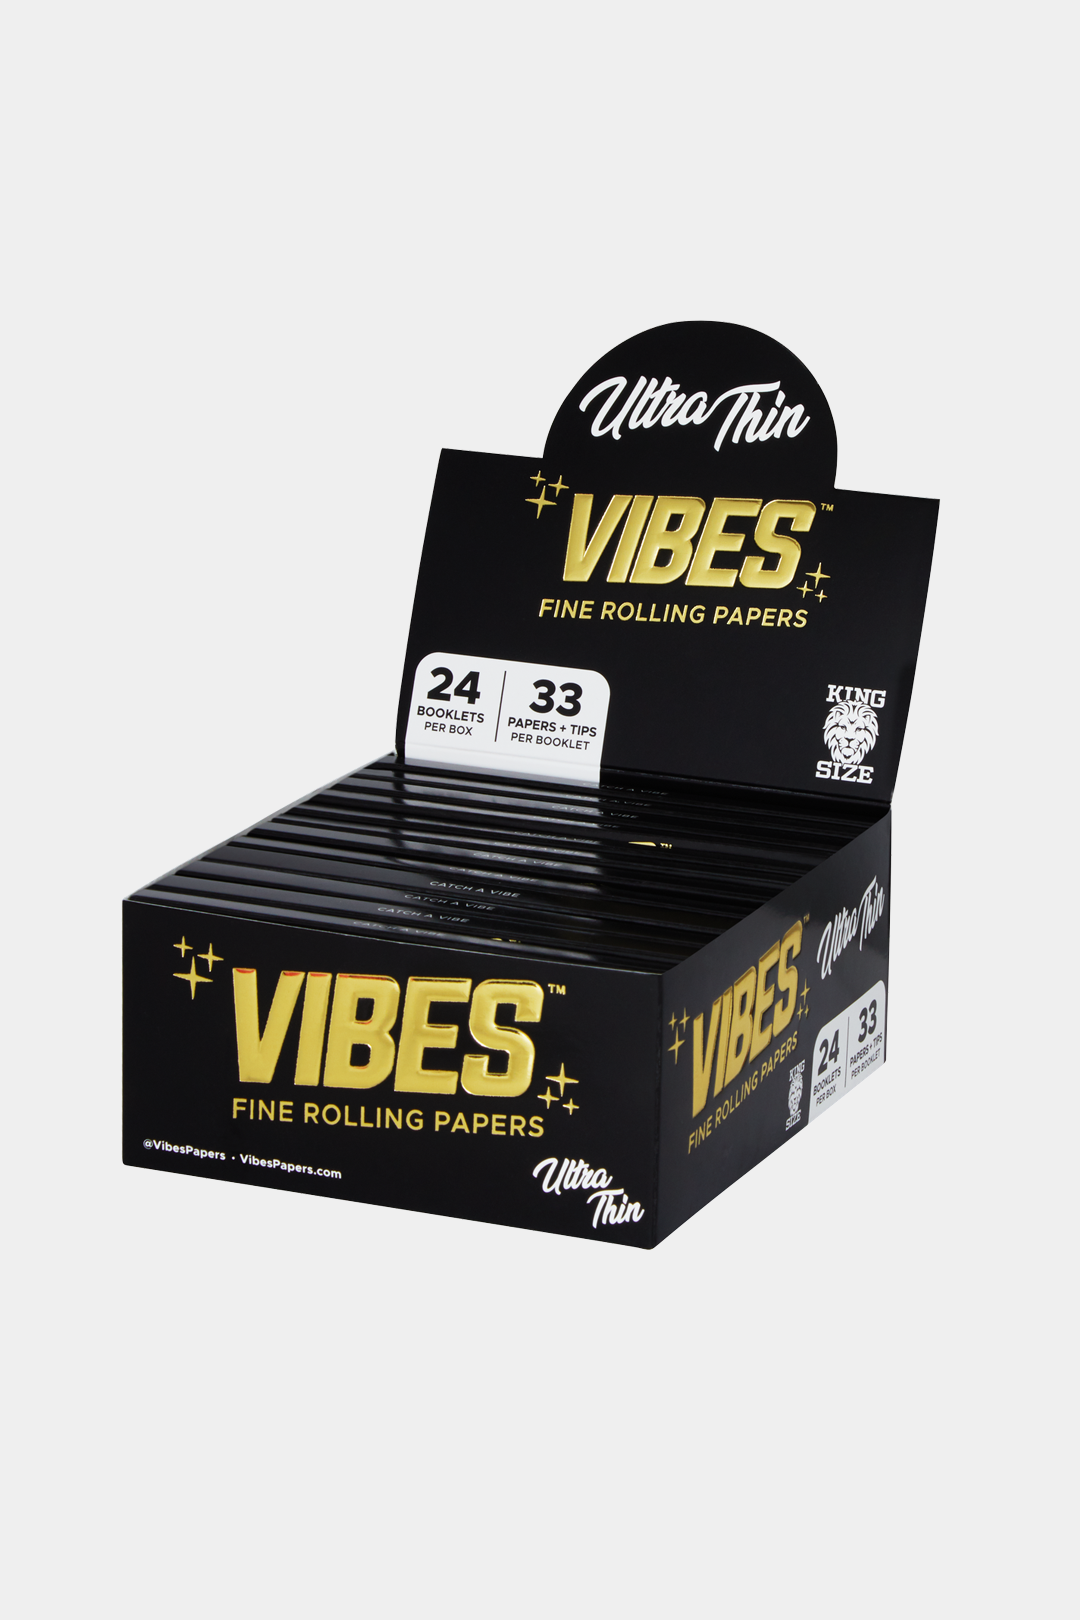 Vibes - Ultra Thin King Size Paper + Tips -25CT Display